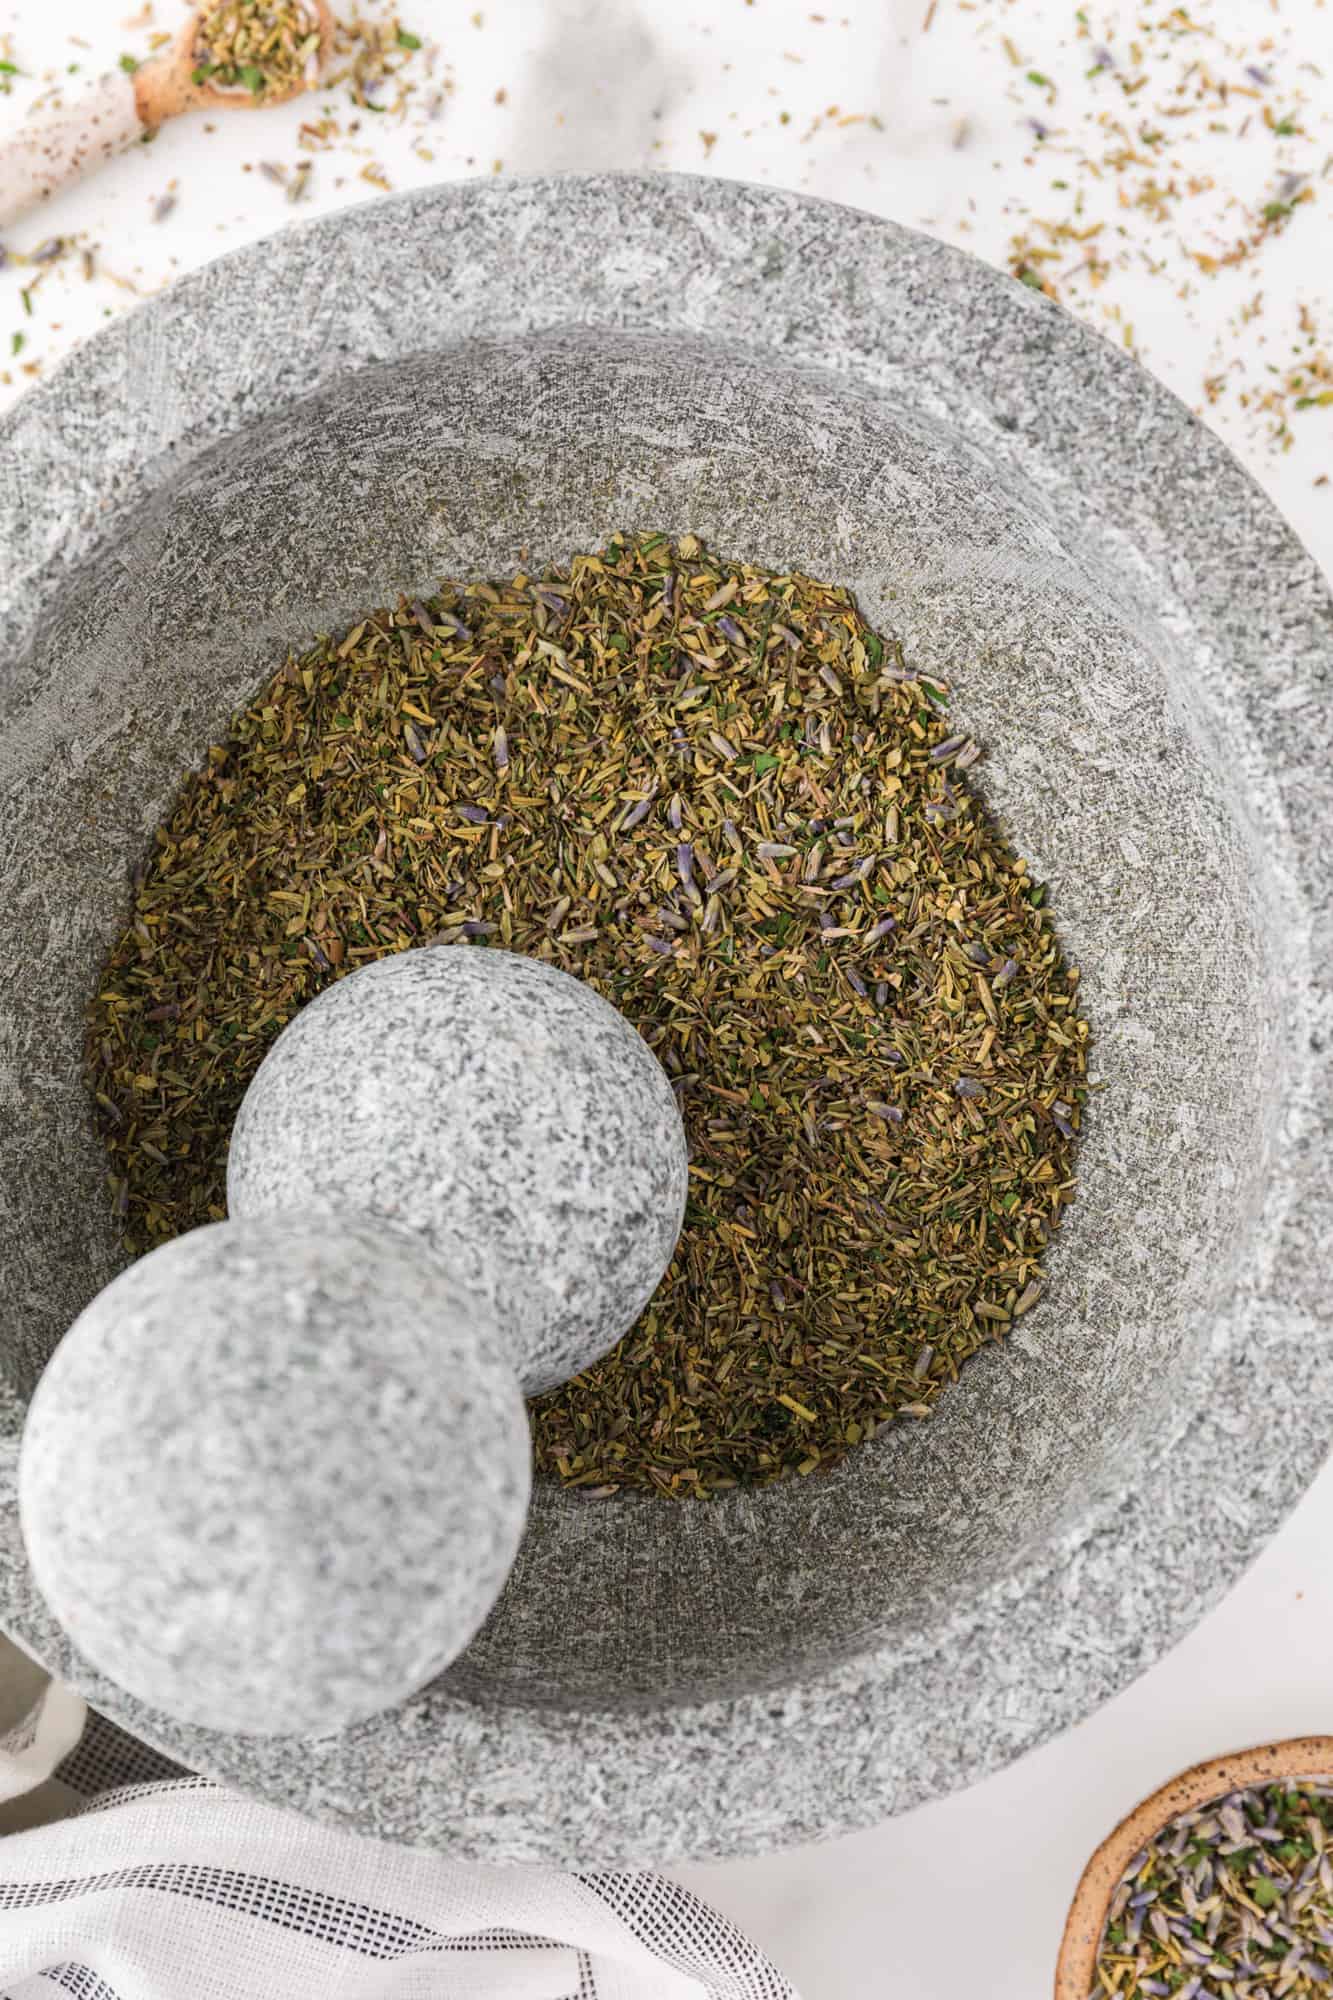 Herbs being ground in a mortar and pestle.